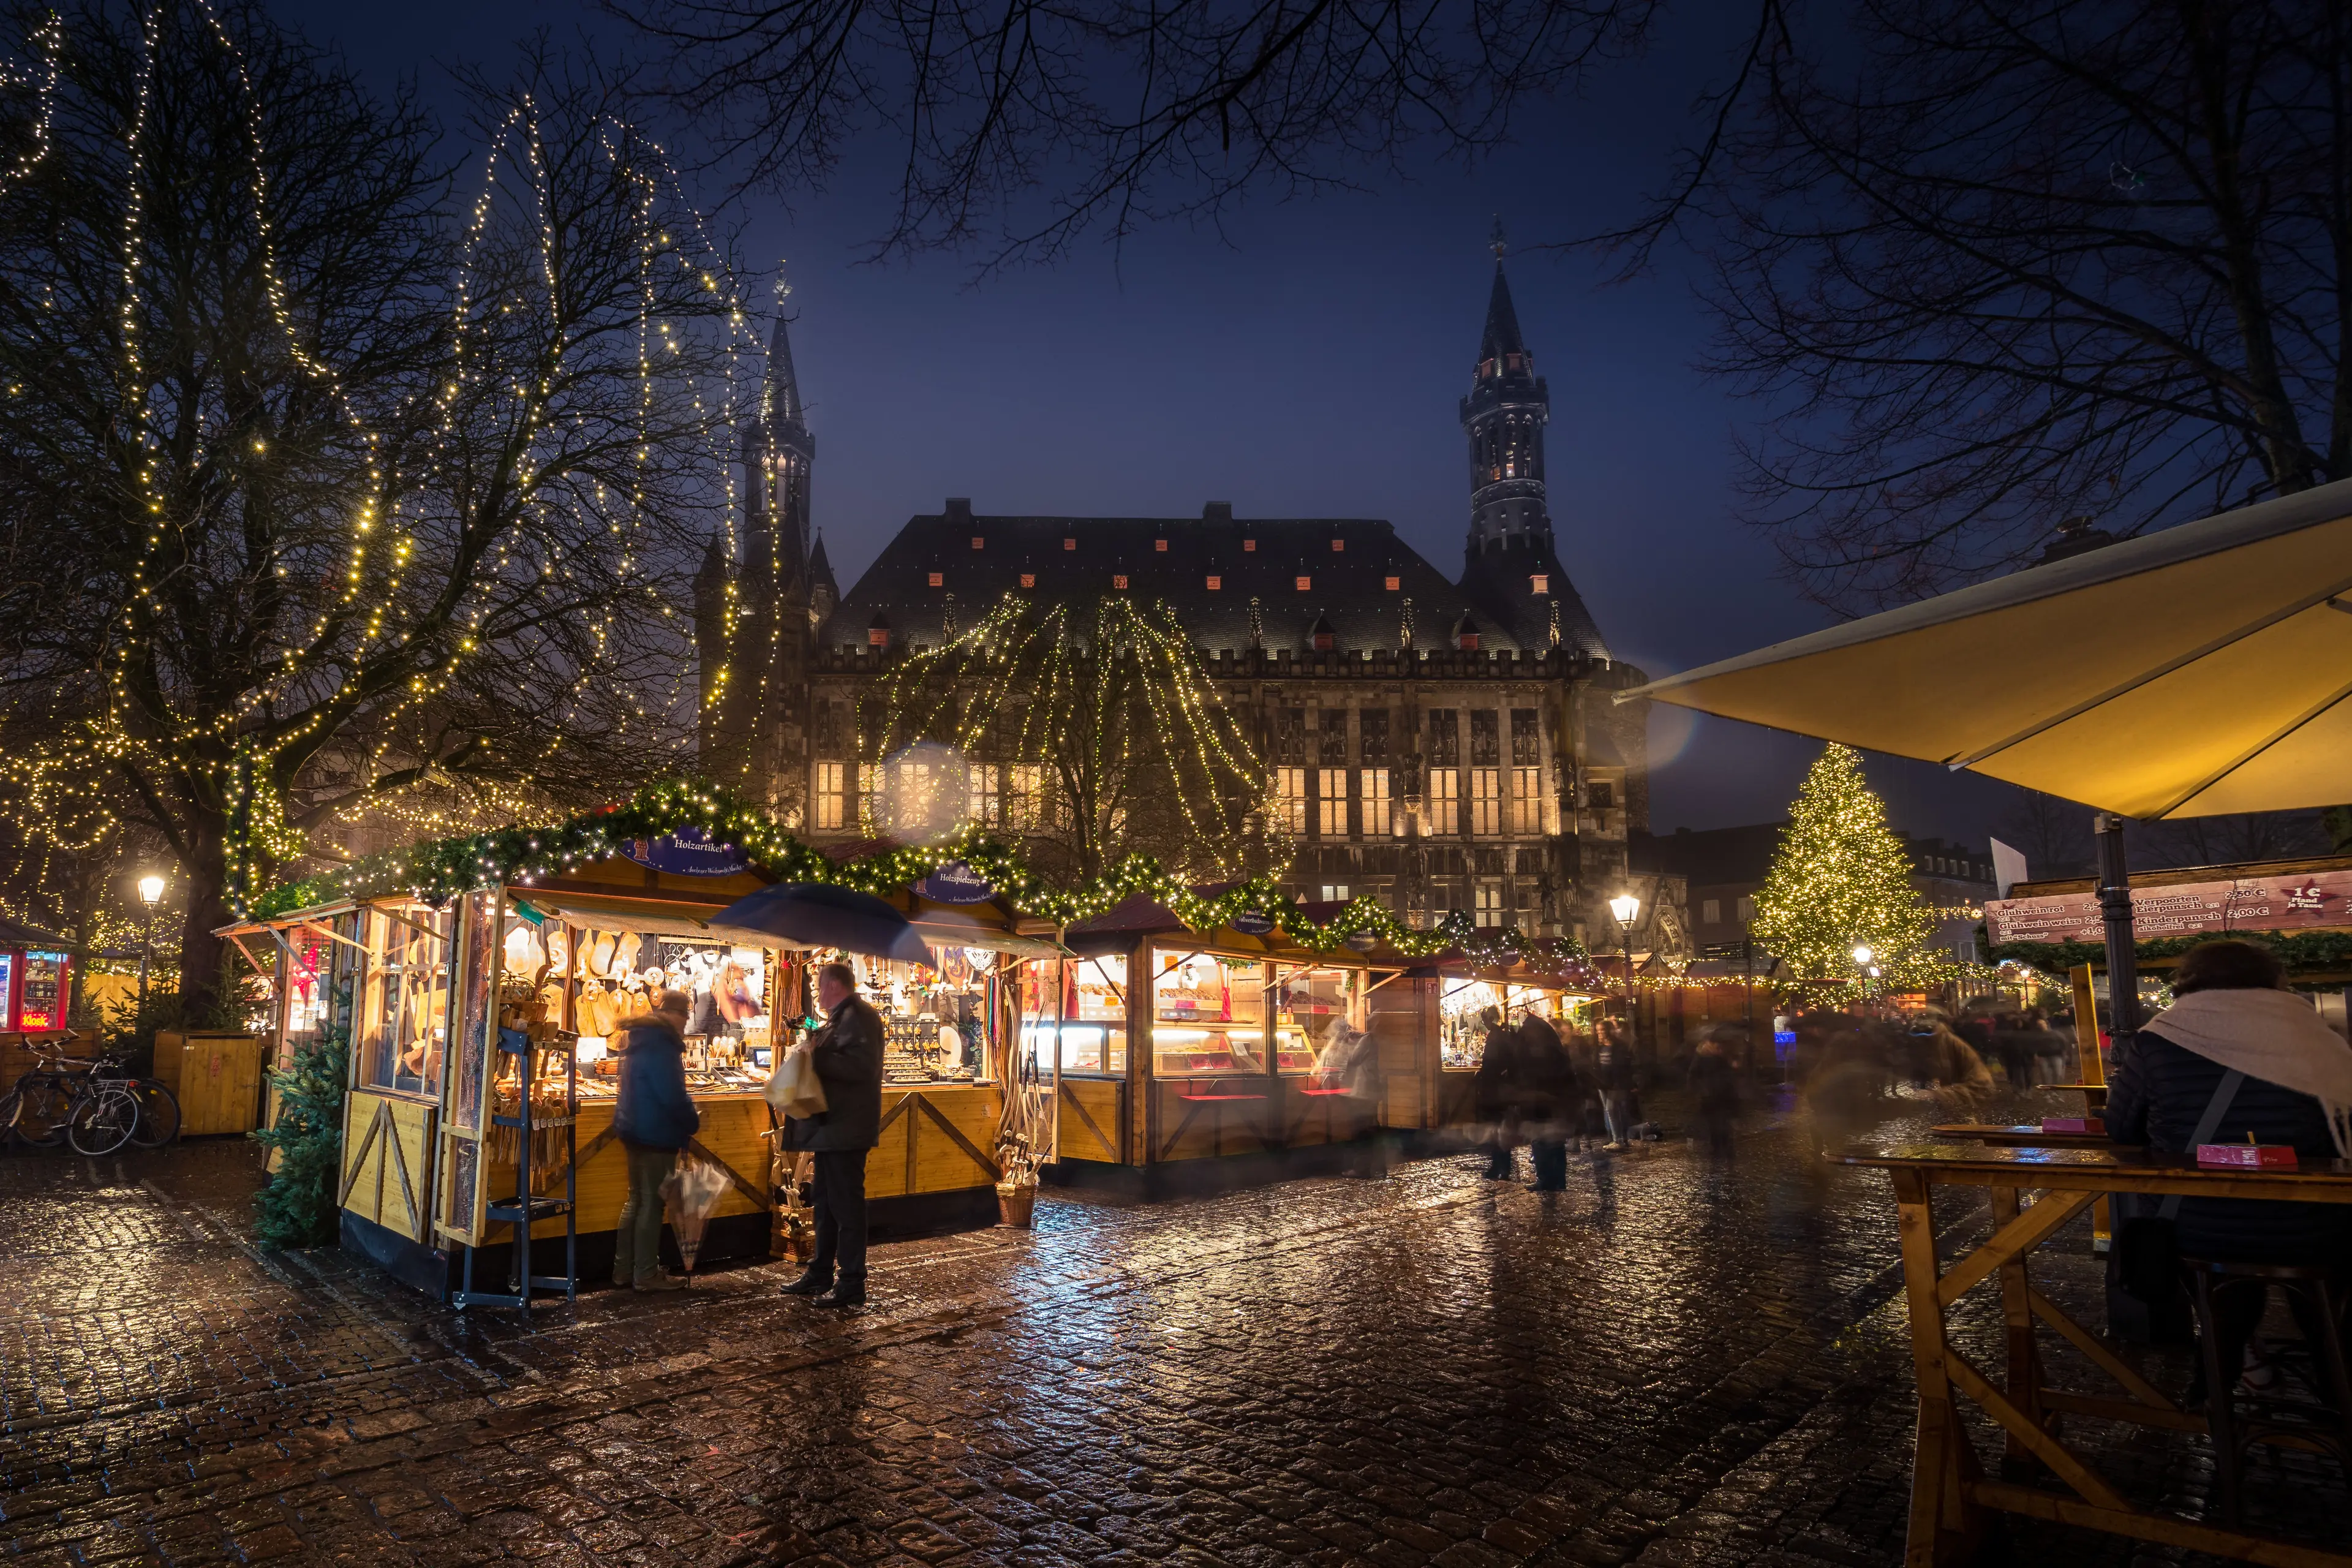 3-Day Christmas Couple Getaway in Aachen, Germany